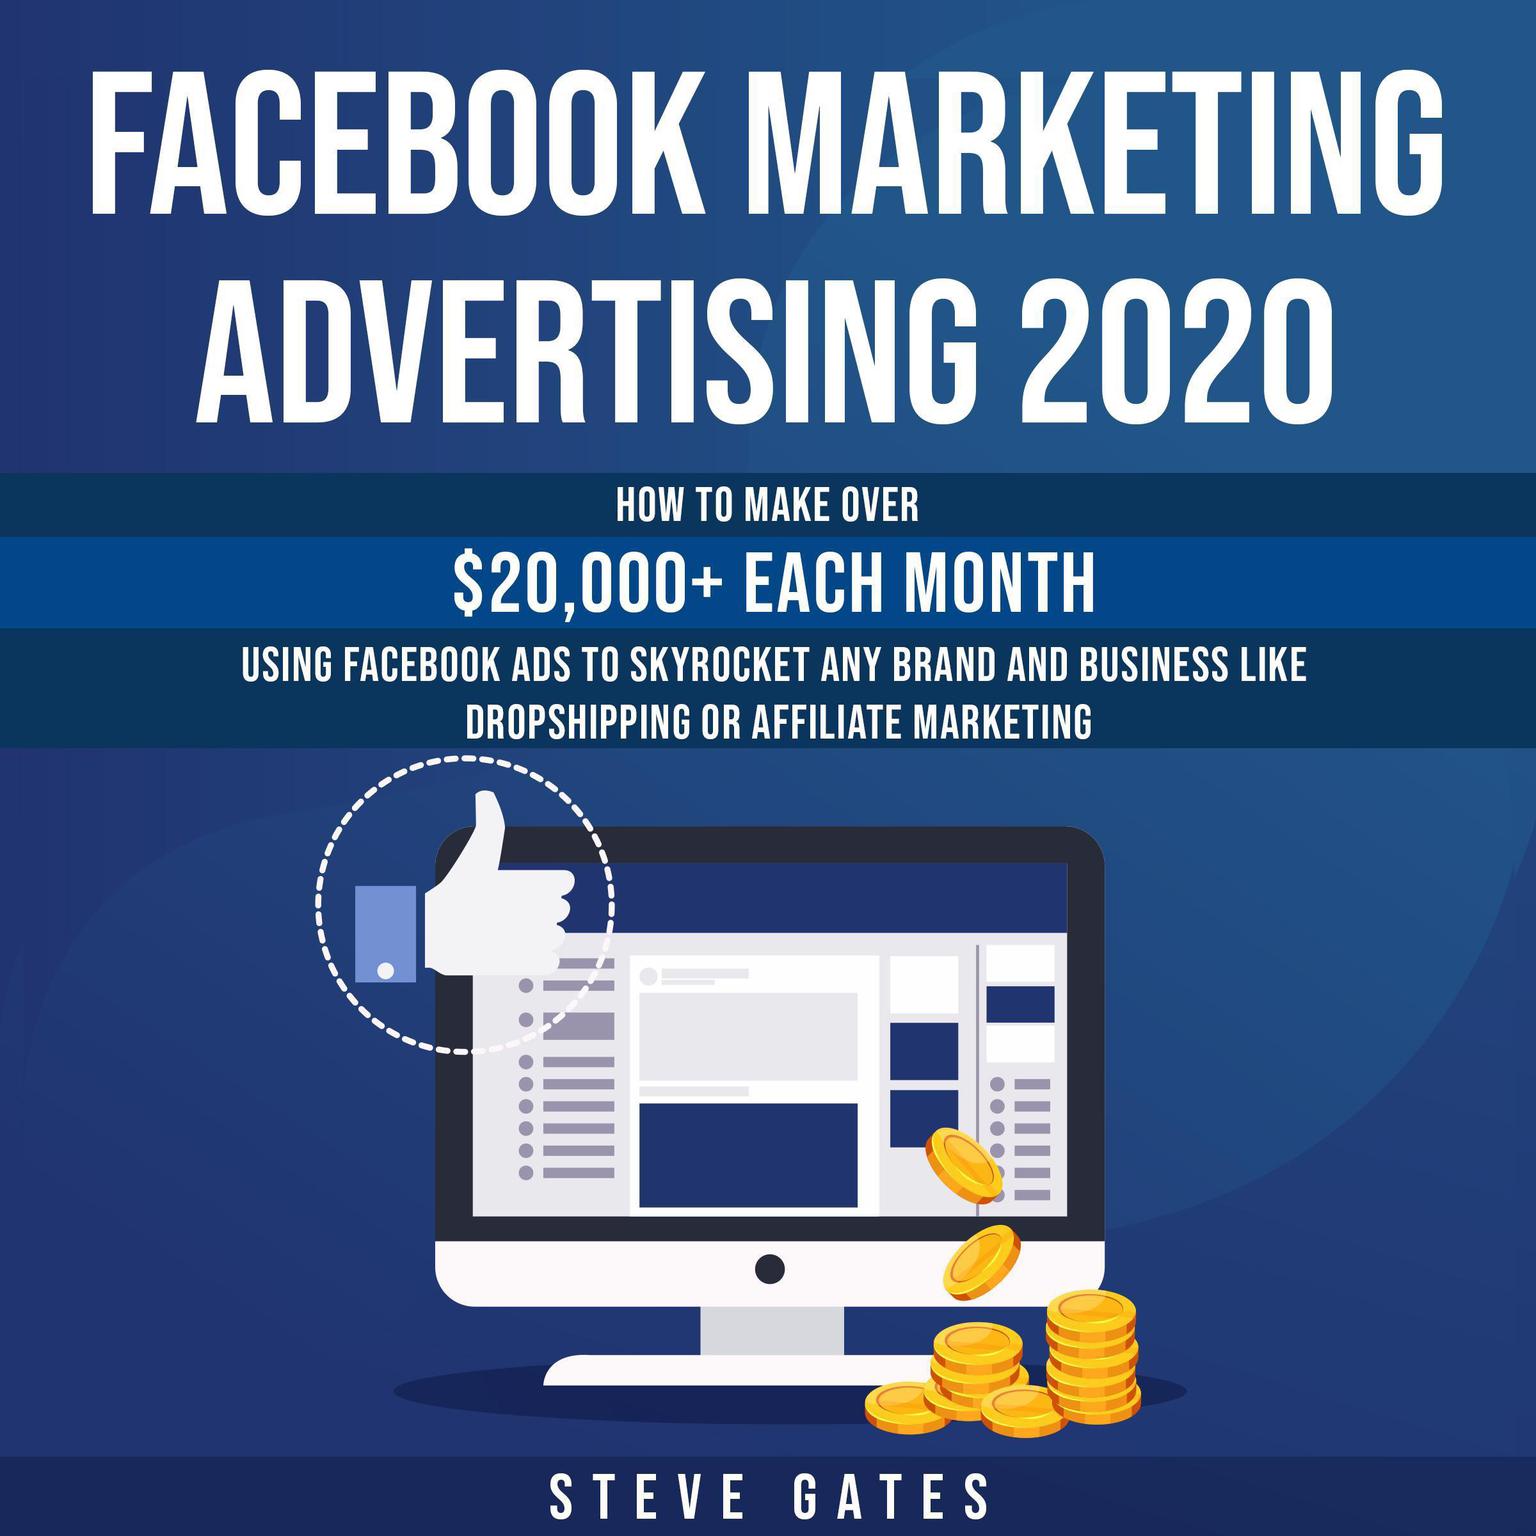 Facebook Marketing Advertising 2020: How to Make Over $20,000+ Each Month Using Facebook Ads to Skyrocket any Brand and Business like Dropshipping or Affiliate Marketing: How to Make Over $20,000+ Each Month Using Facebook Ads to Skyrocket any Brand and Business like Dropshipping or Affiliate Marketing Audiobook, by Steve Gates